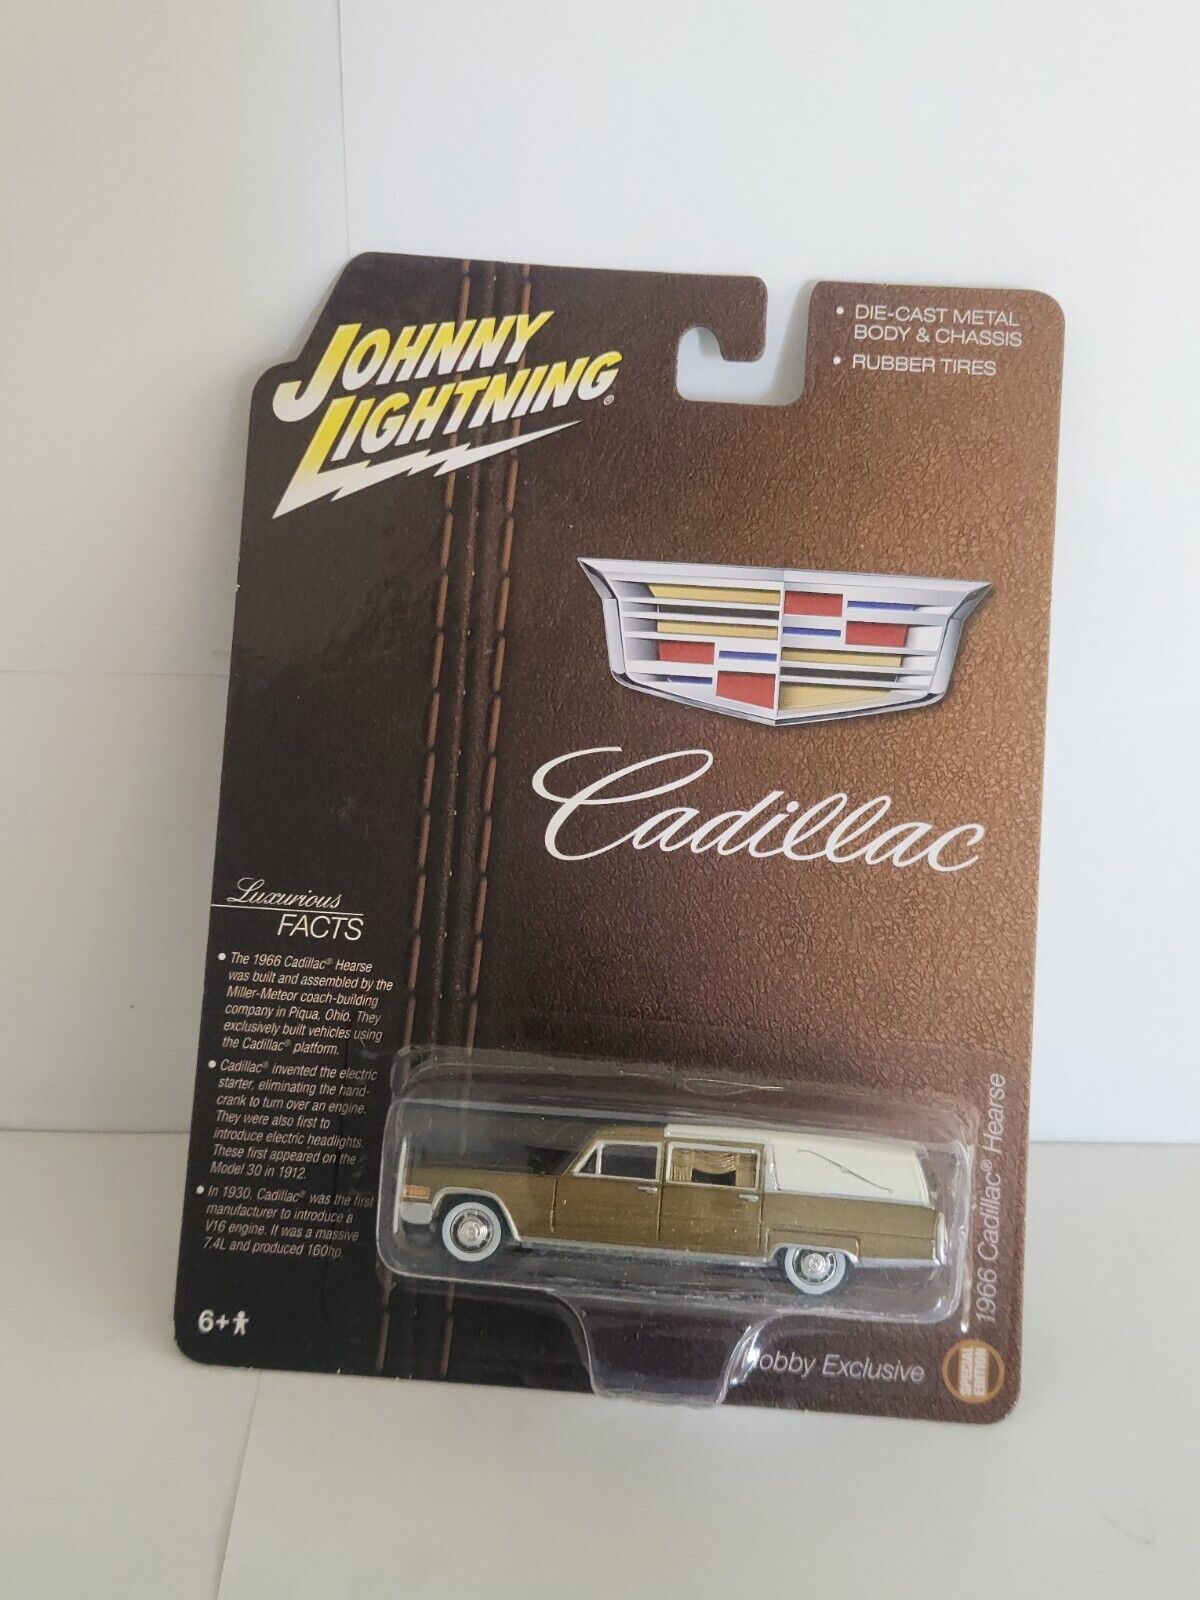 Johnny Lightning 1966 Cadillac Leichenwagen Hobby Exclusive L26